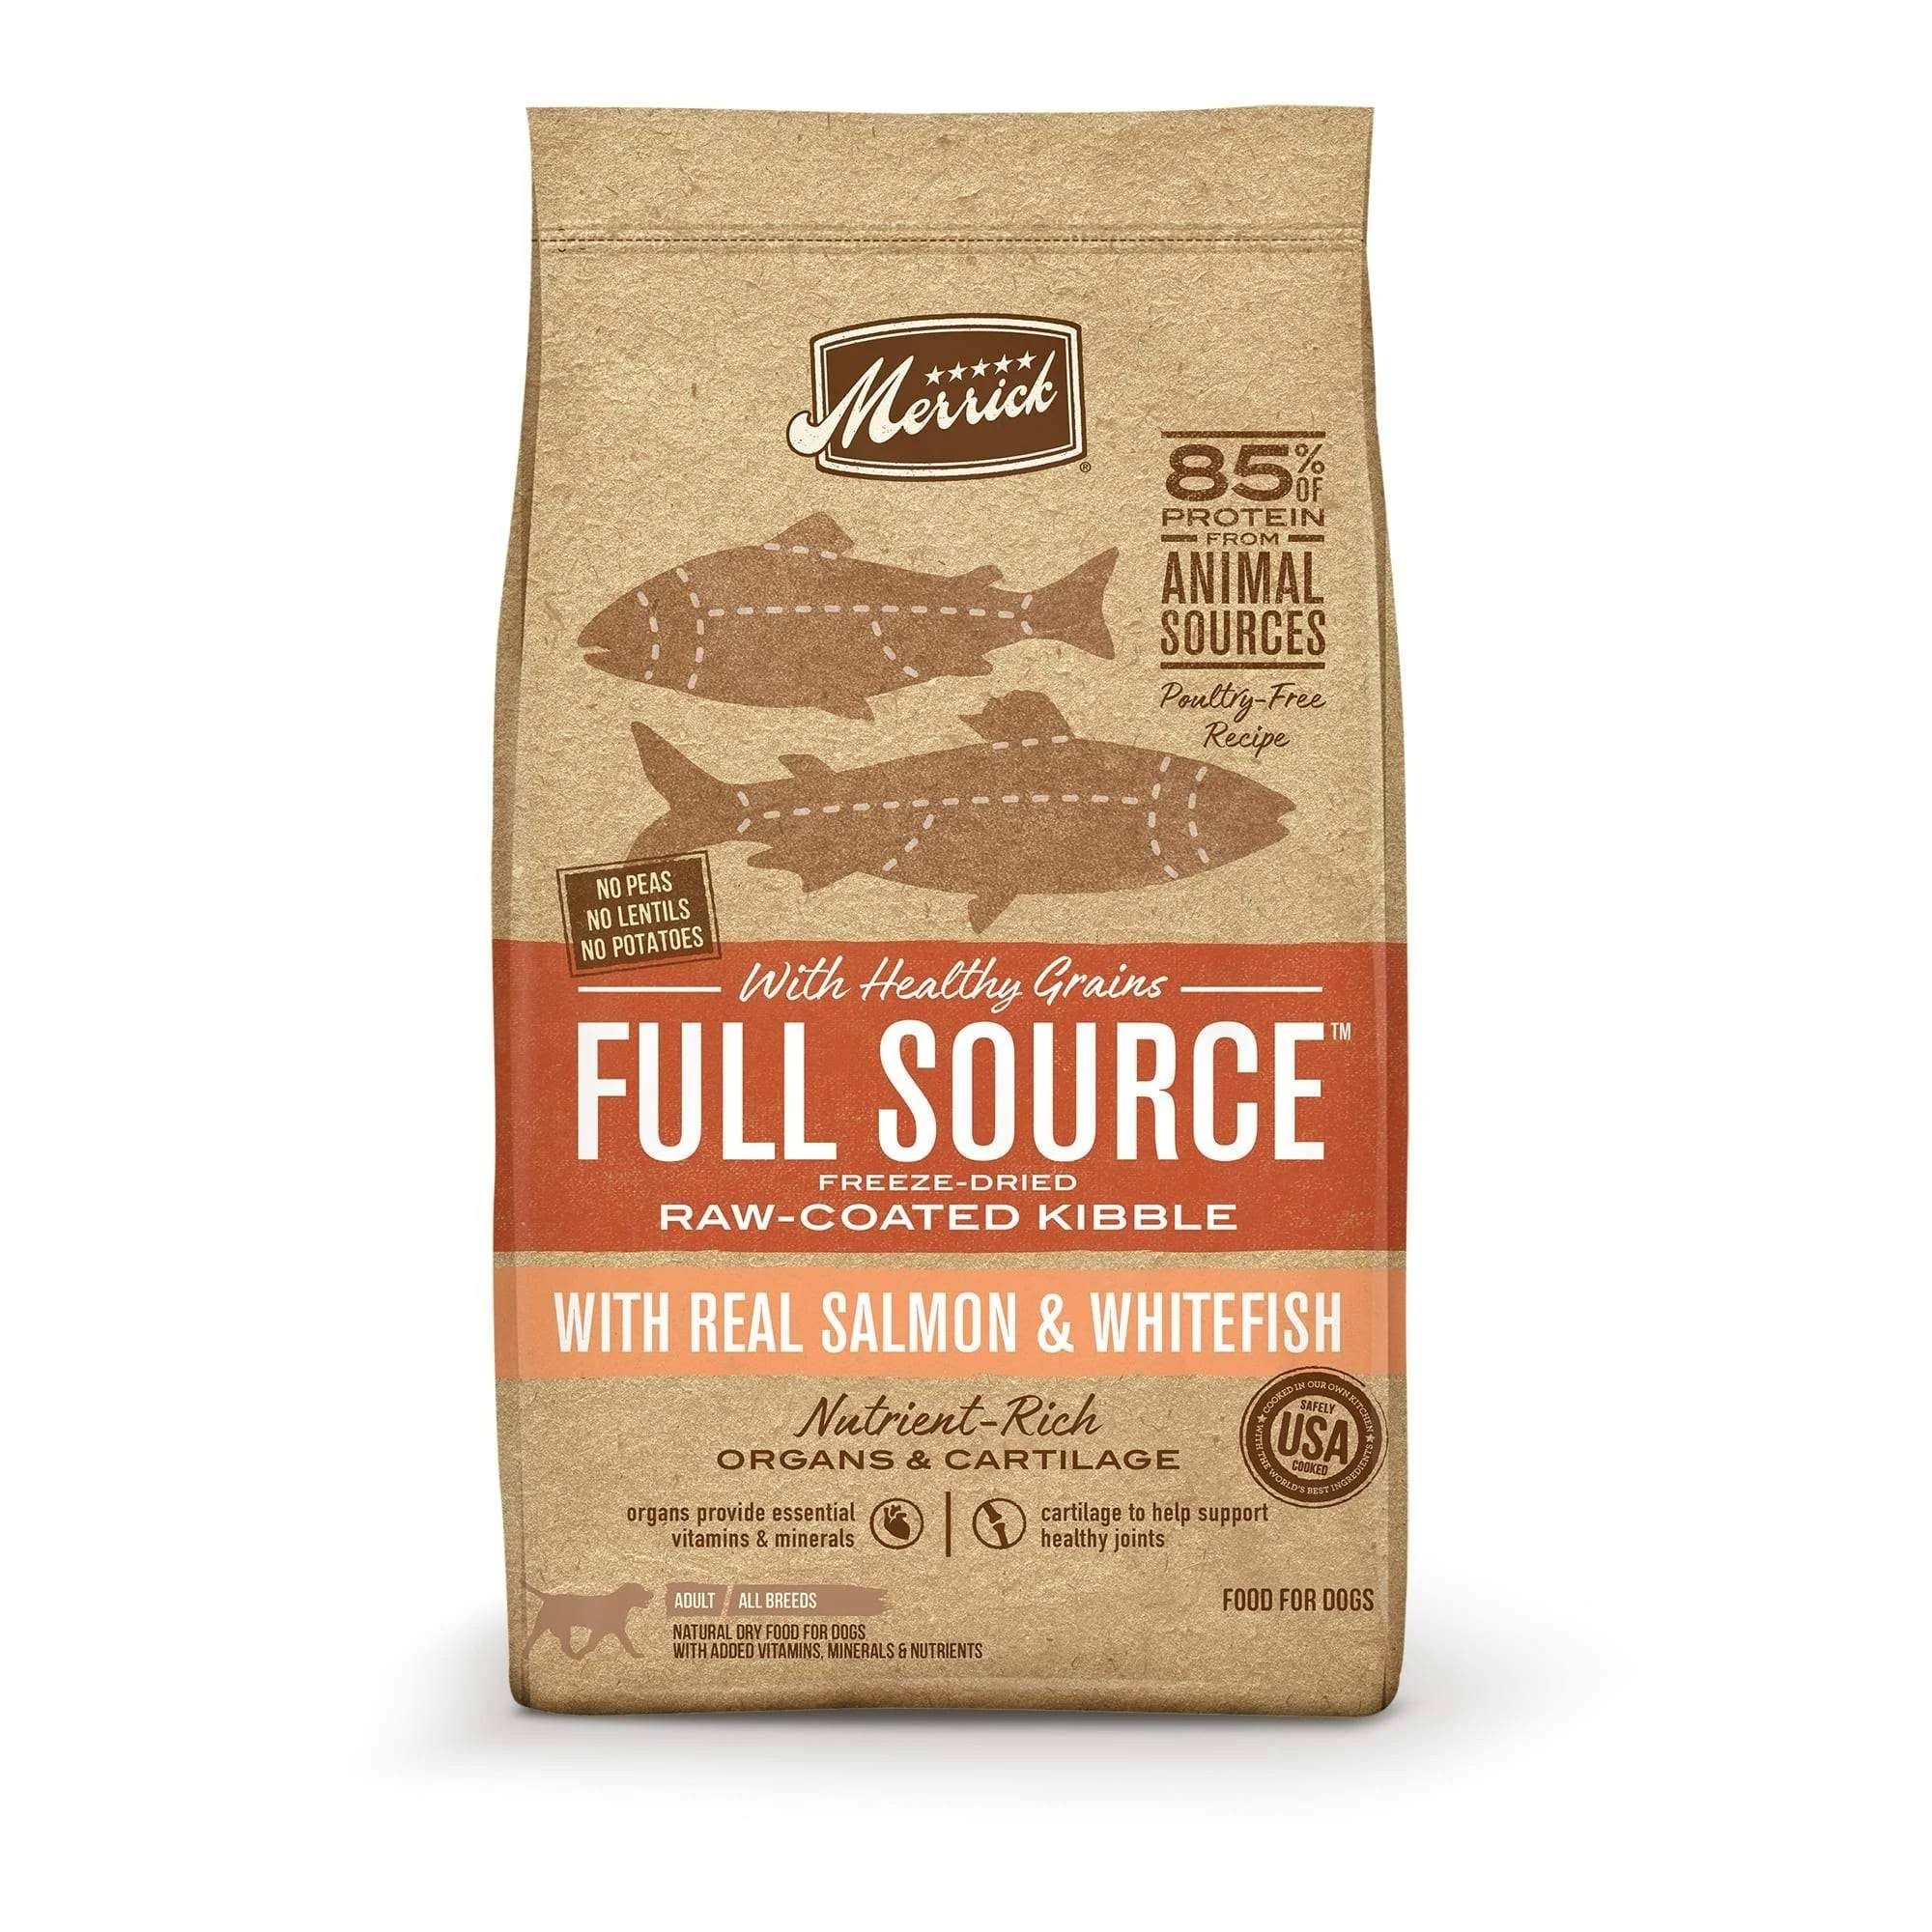 Merrick Full Source with Healthy Grains Raw-Coated Kibble with Real Salmon & Whitefish - 20 lb. Bag